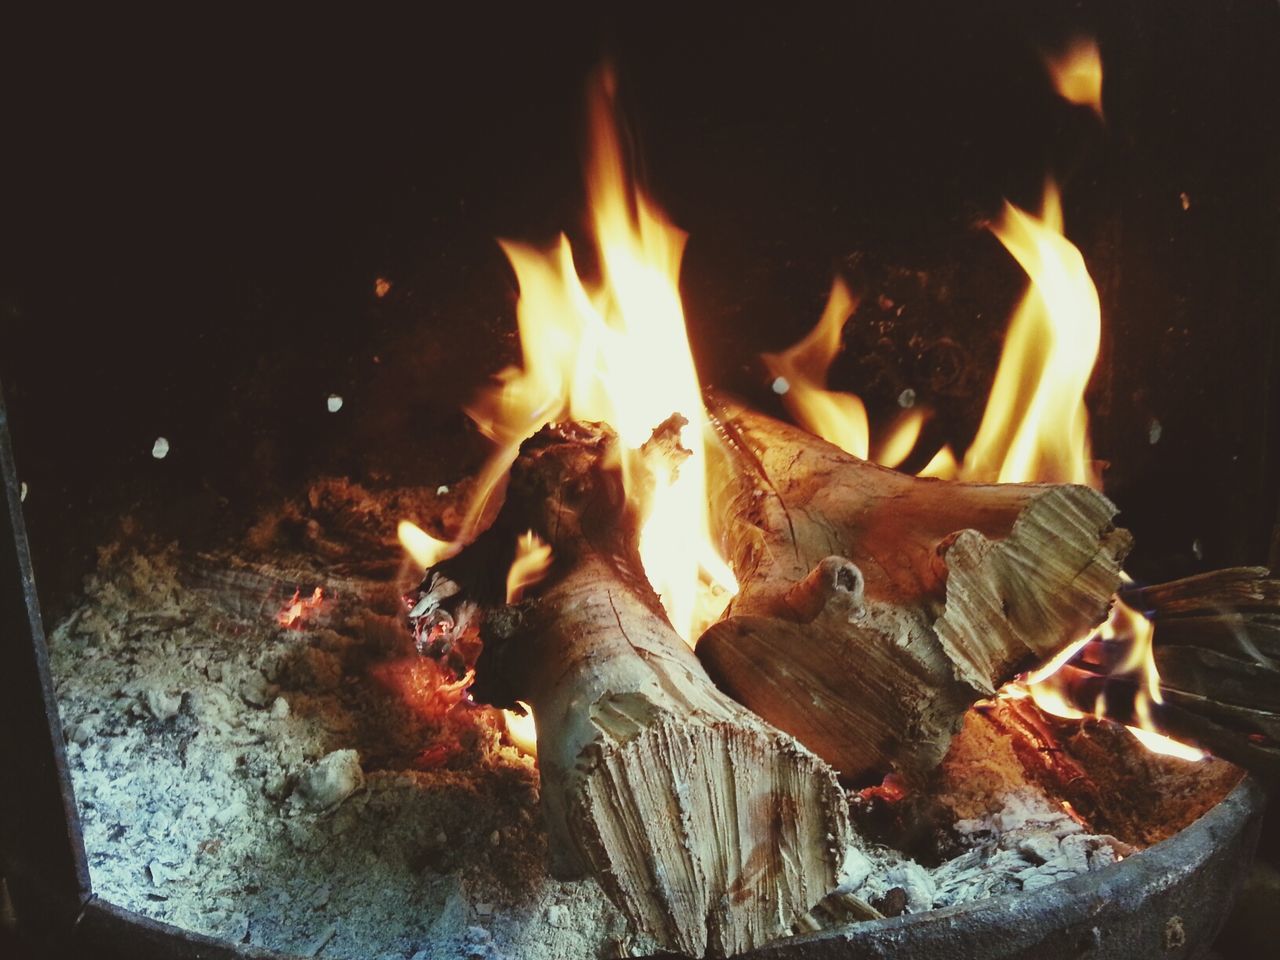 flame, burning, fire - natural phenomenon, heat - temperature, bonfire, firewood, fire, glowing, night, campfire, heat, wood - material, fireplace, motion, log, close-up, orange color, high angle view, wood, dark